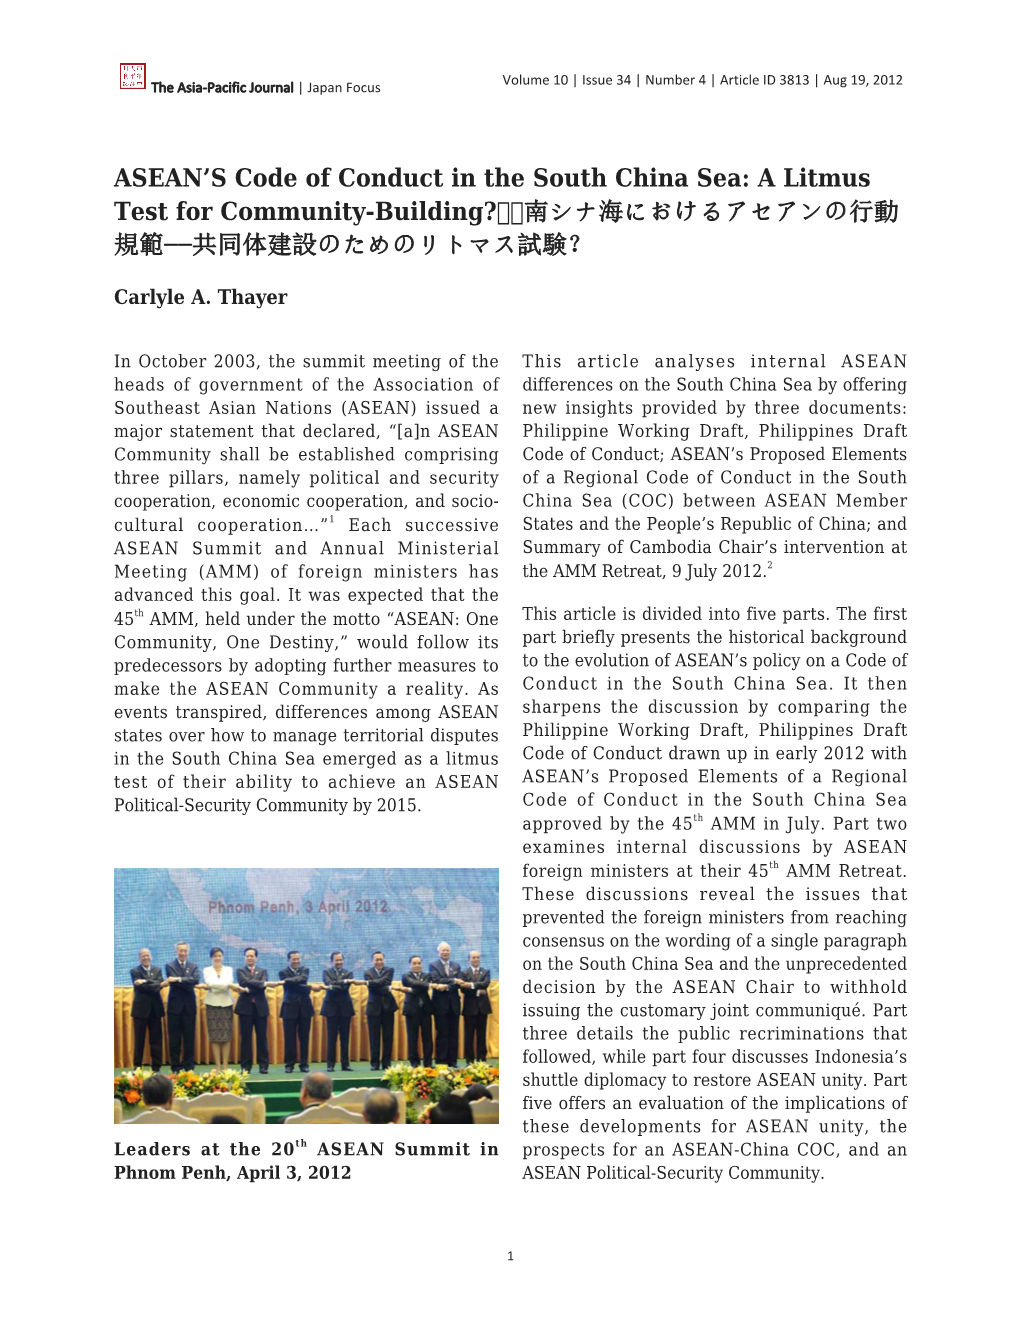 ASEAN's Code of Conduct in the South China